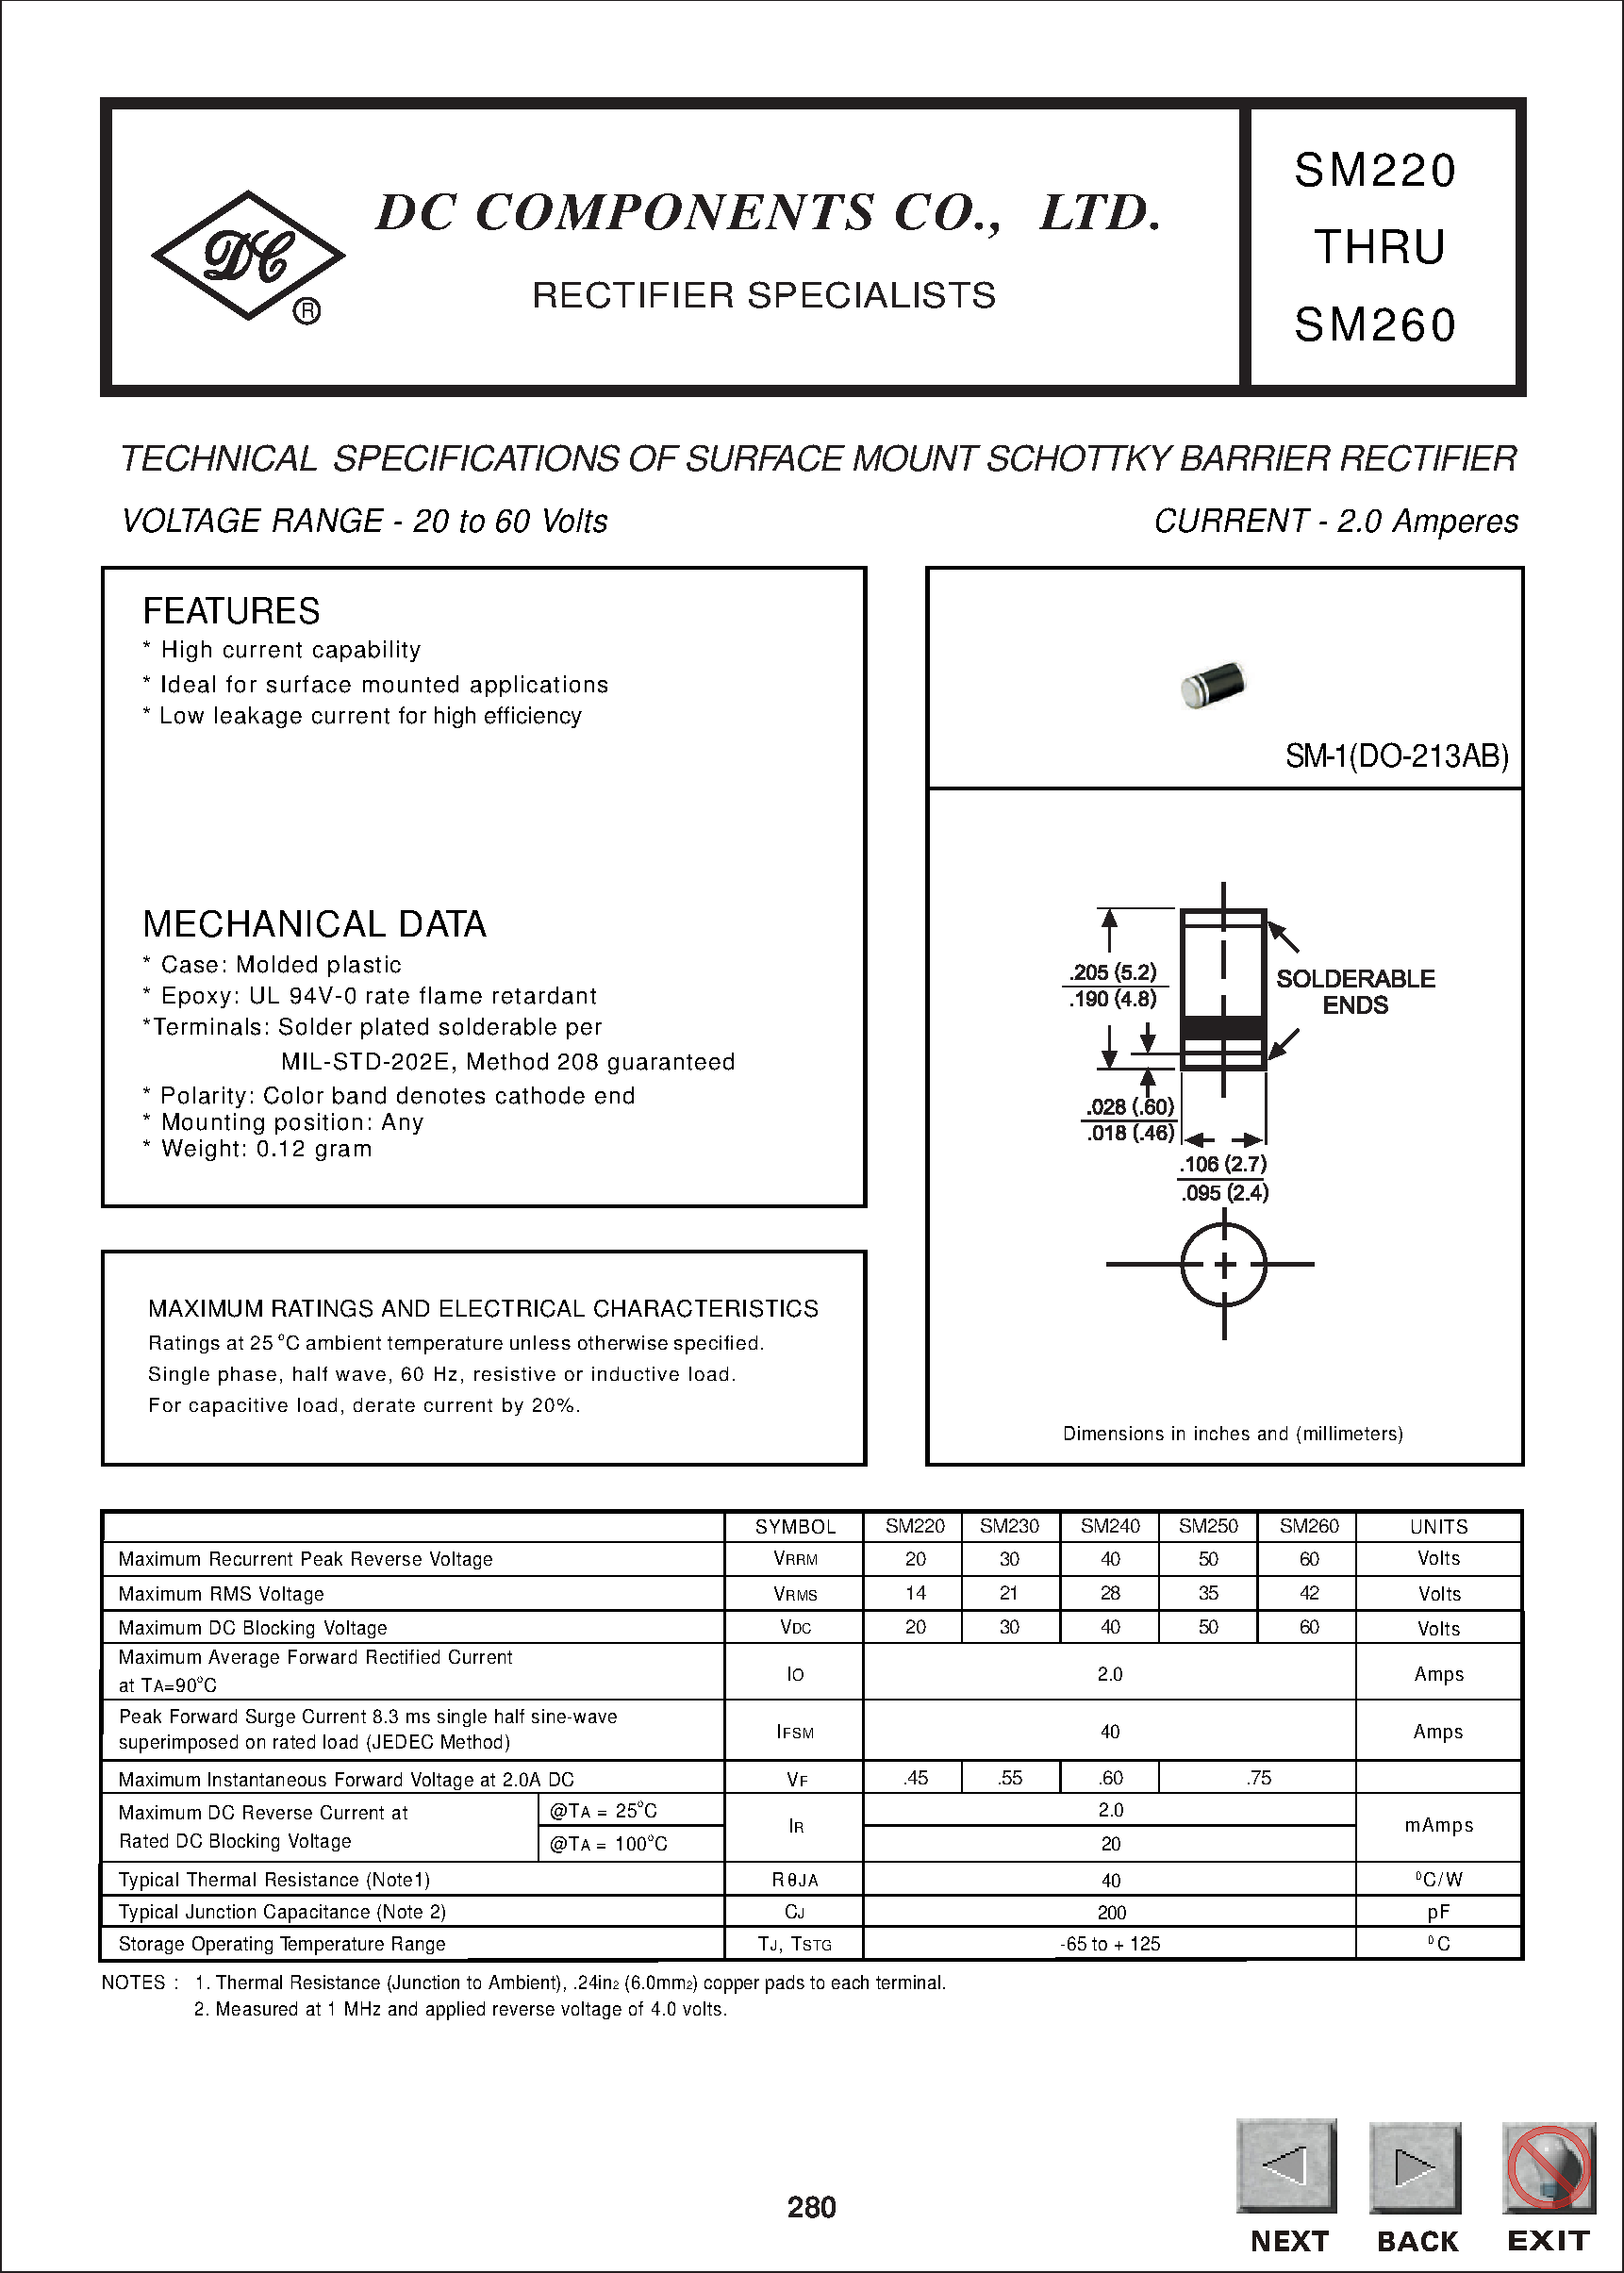 Datasheet SM220 - TECHNICAL SPECIFICATIONS OF SURFACE MOUNT SCHOTTKY BARRIER RECTIFIER page 1